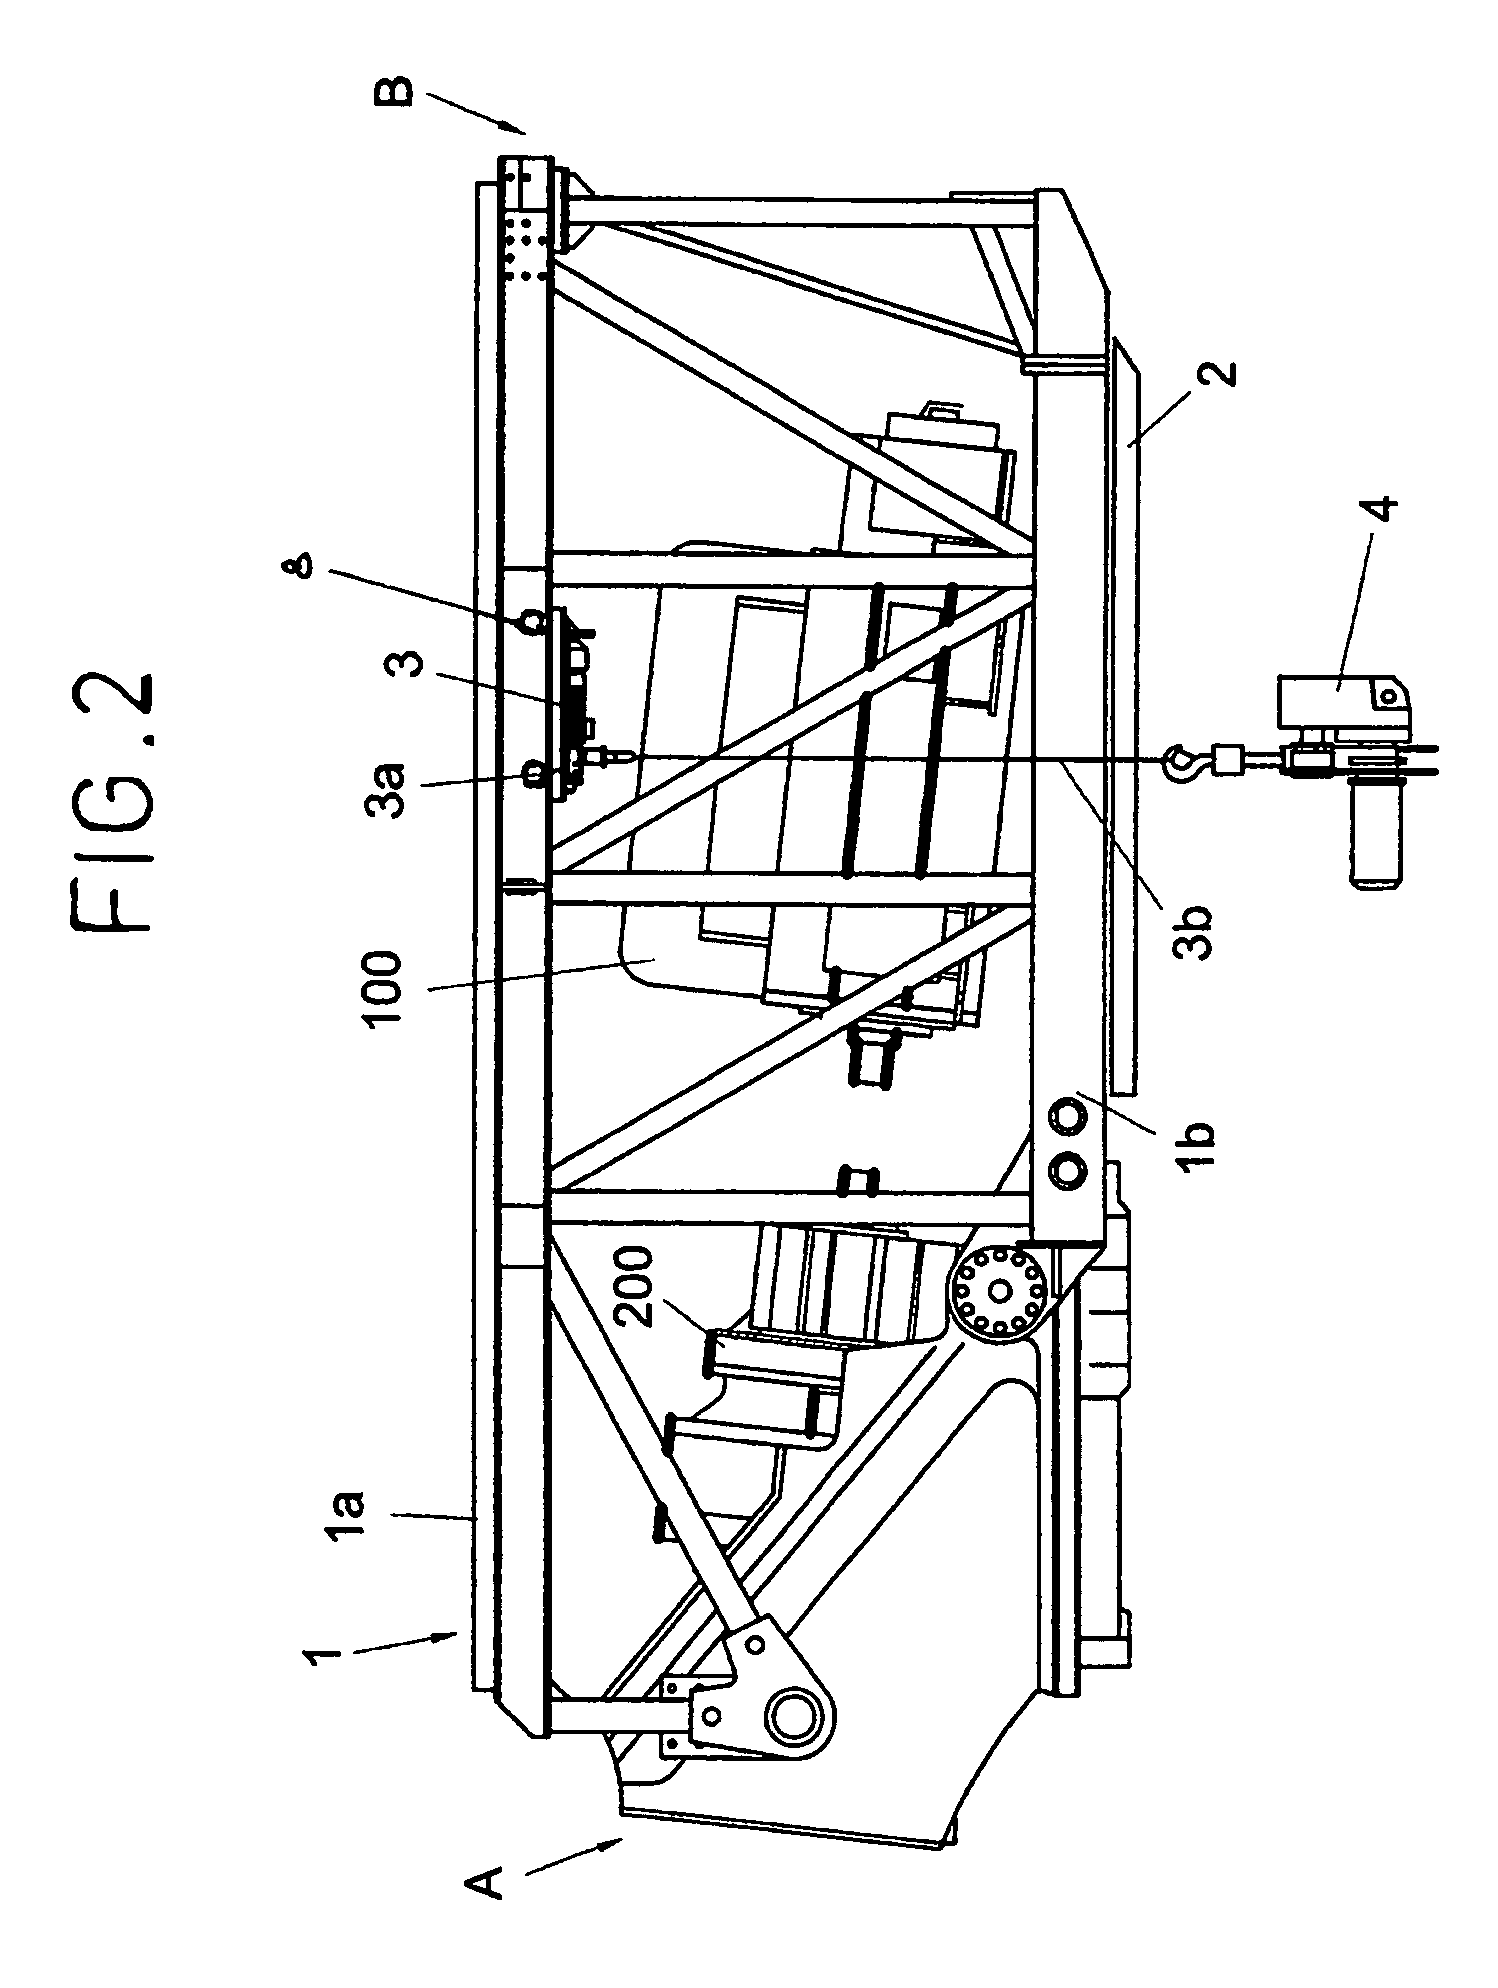 Method and system for performing operations on a wind turbine